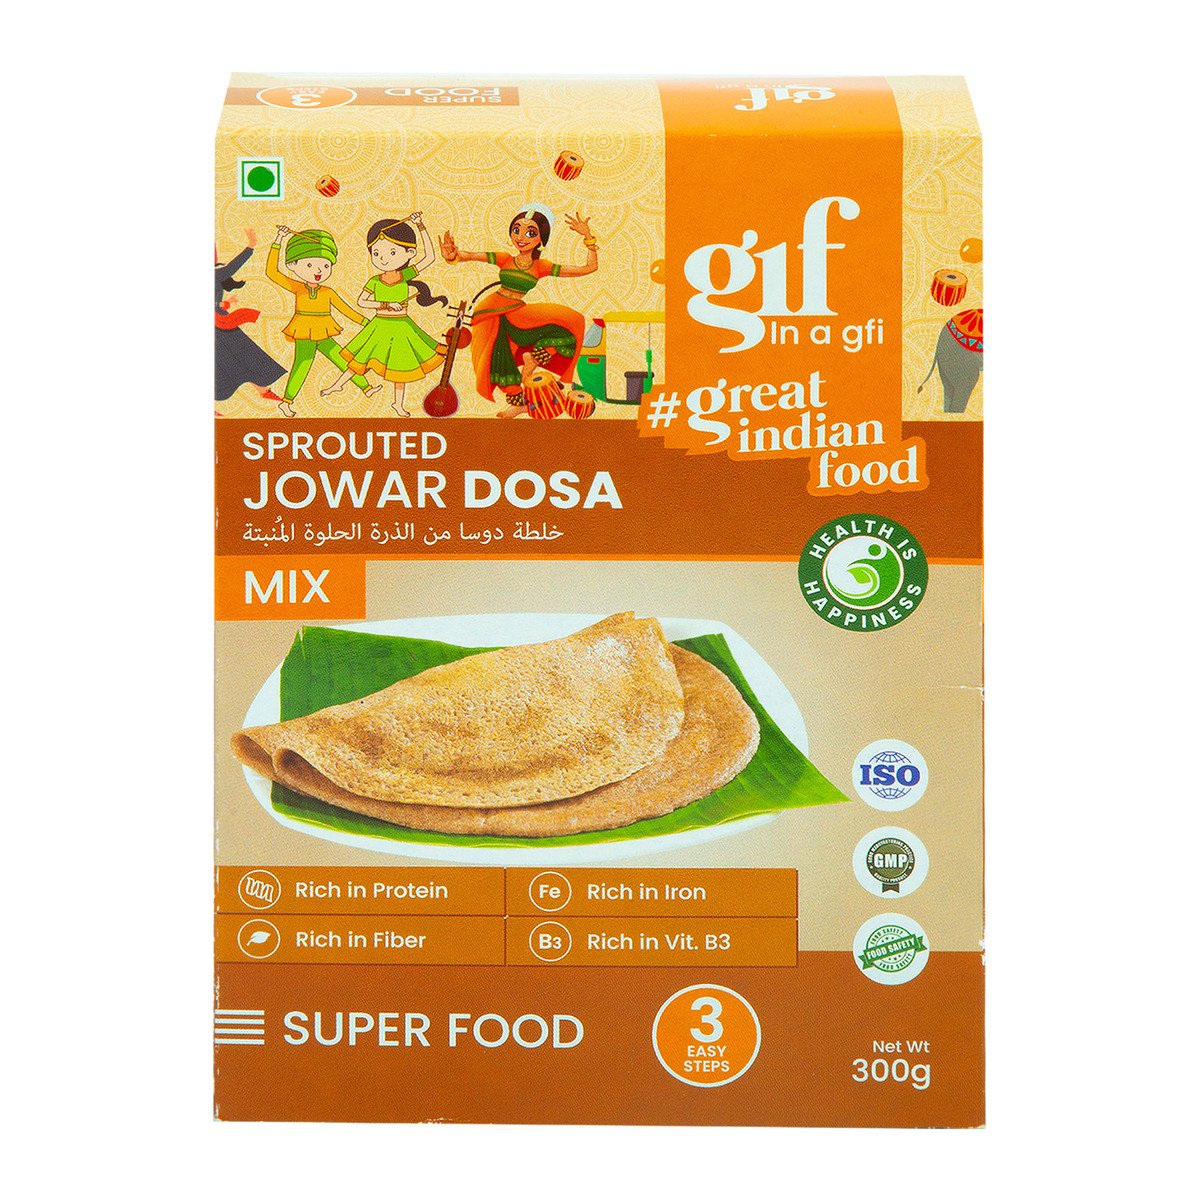 Great Indian Food Sprouted Jowar Dosa Mix 300 g